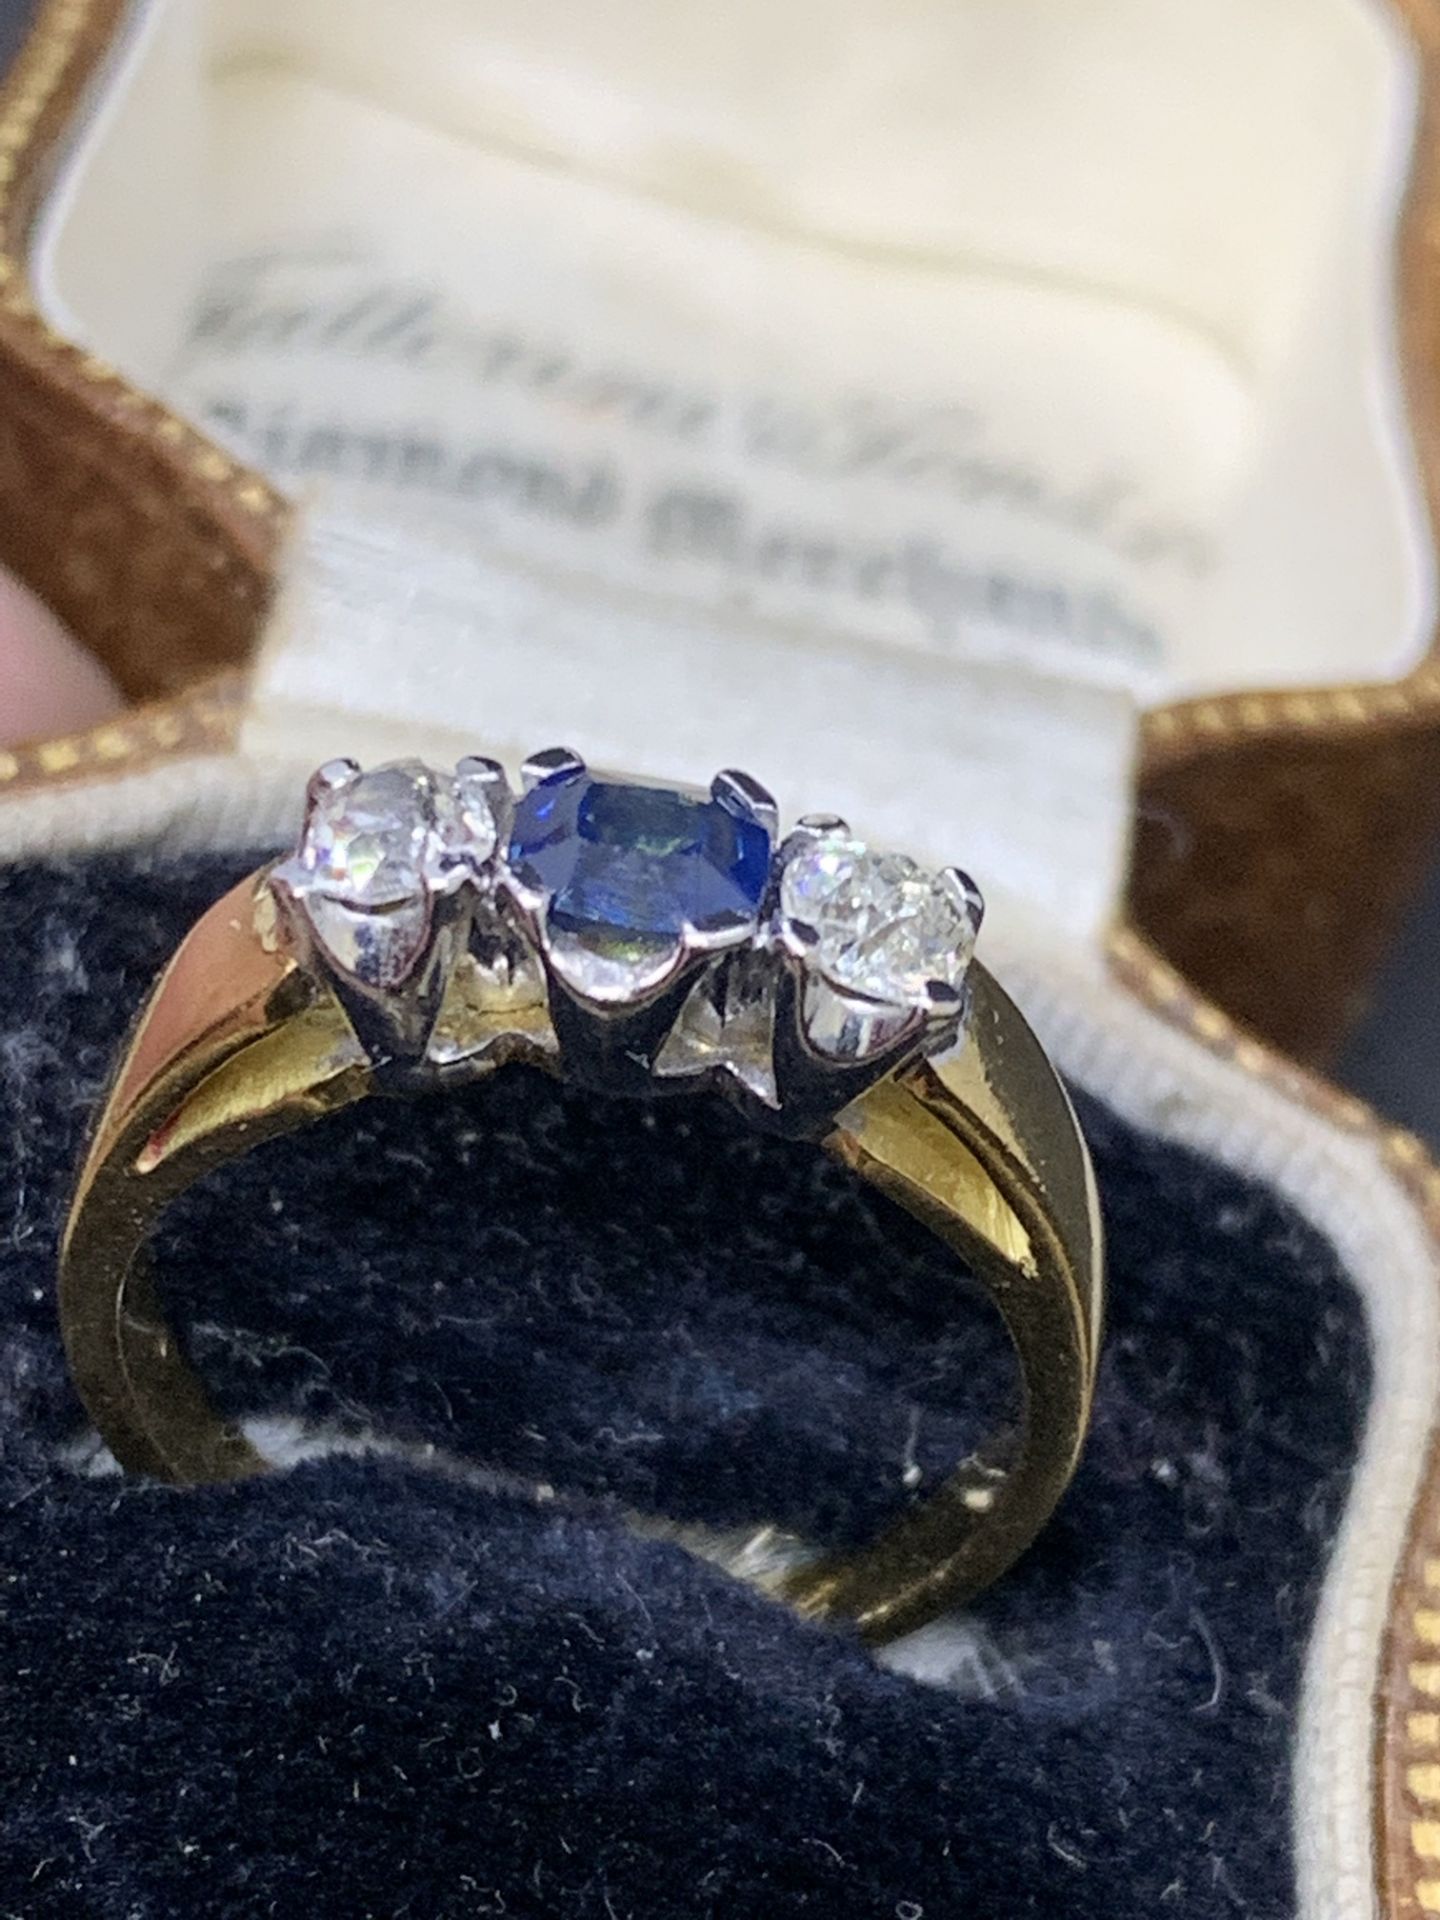 Sapphire and diamond Ring set in yellow metal tested as 18 carat gold - Image 3 of 4